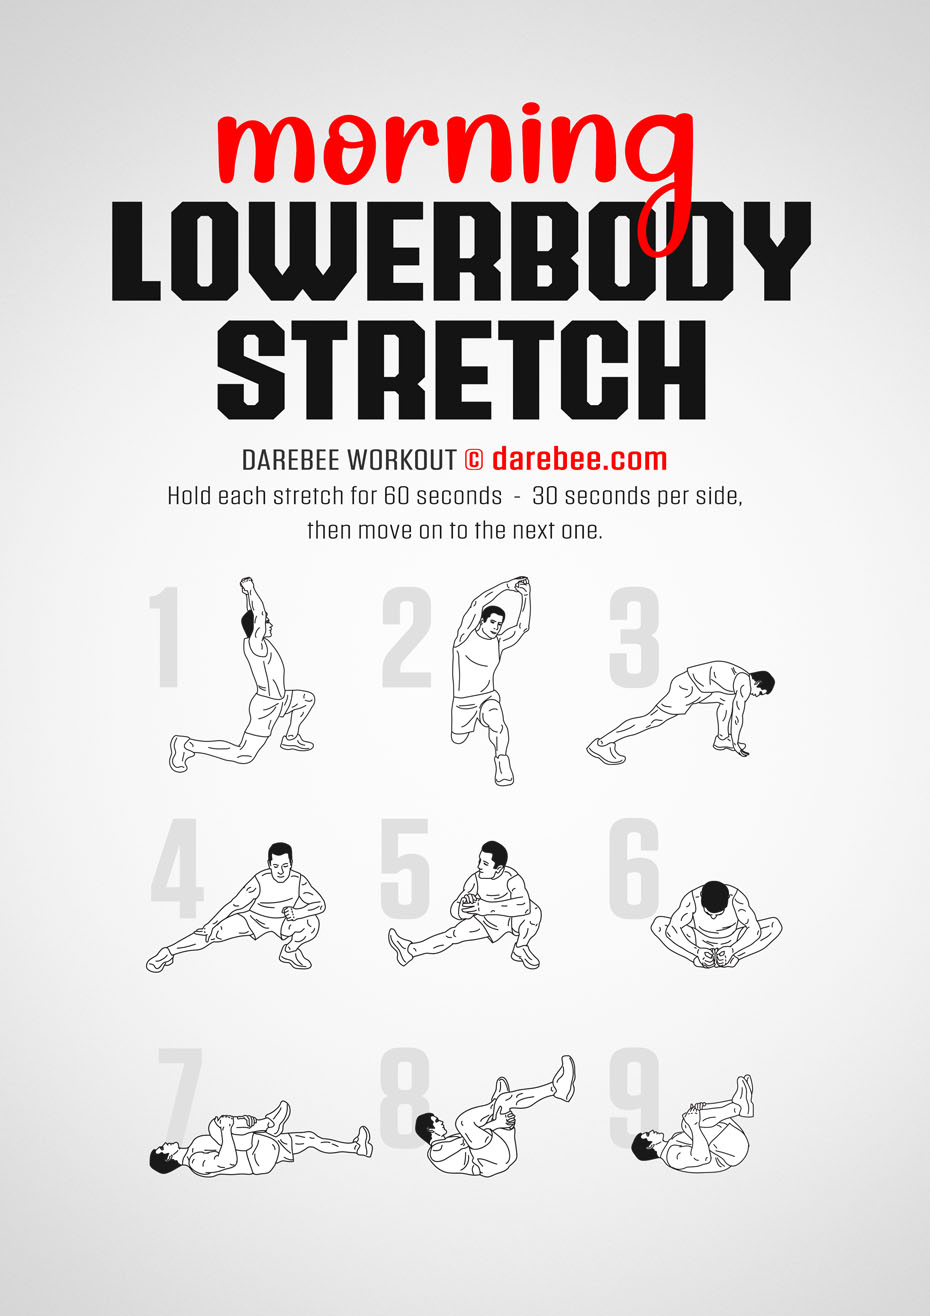 Morning Lowerbody Stretch is a DAREBEE no-equipment home fitness workout that helps you remain agile, flexible and mobile. 